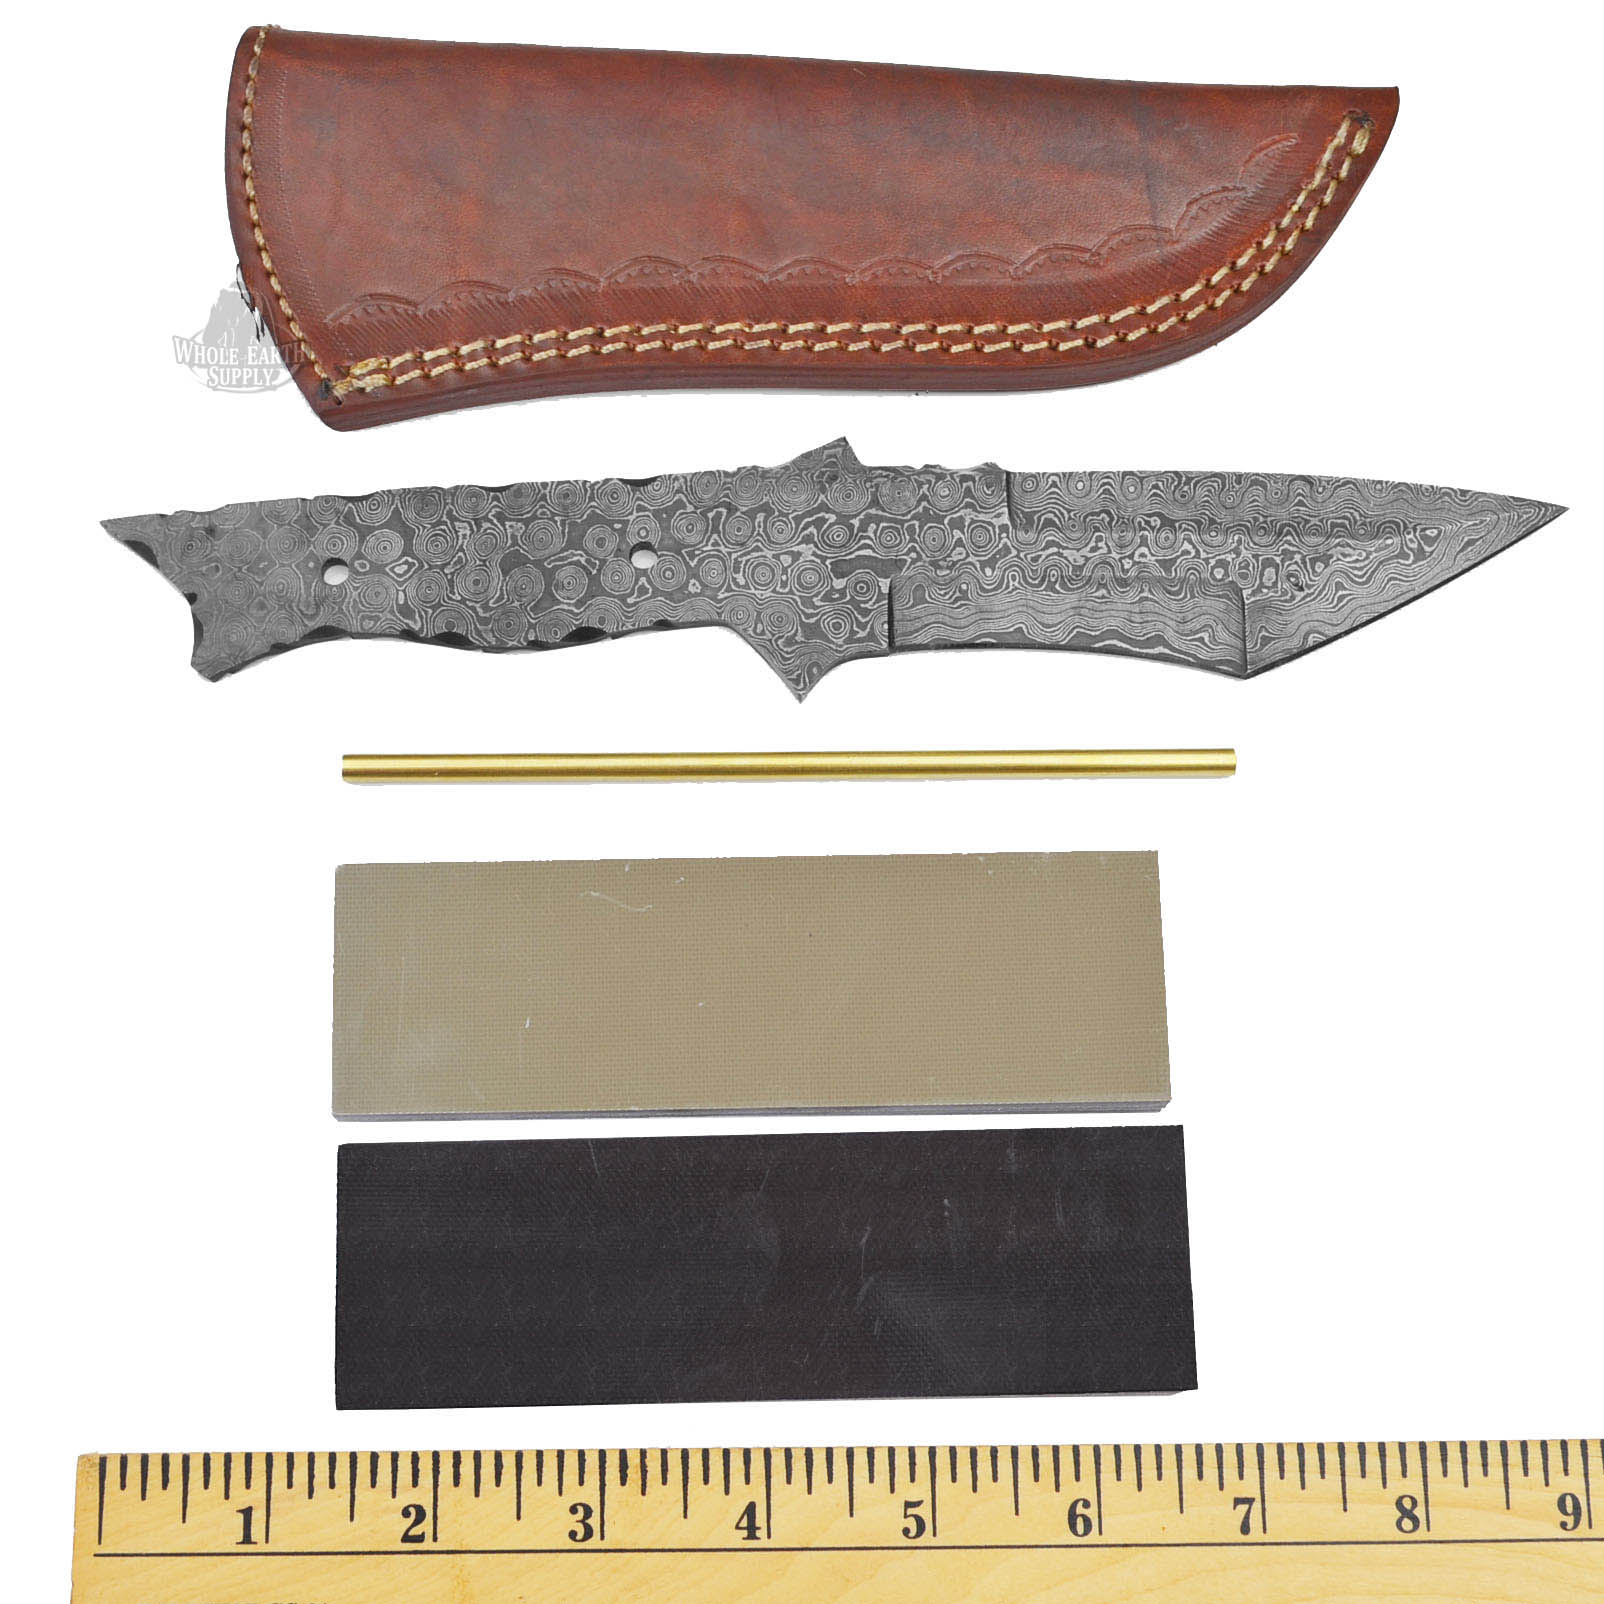 (Knife Kit) Build Your Own Damascus Tanto Knife with Tan & Black G-10 Handles and Mosaic Pin Combo Blank Hunting